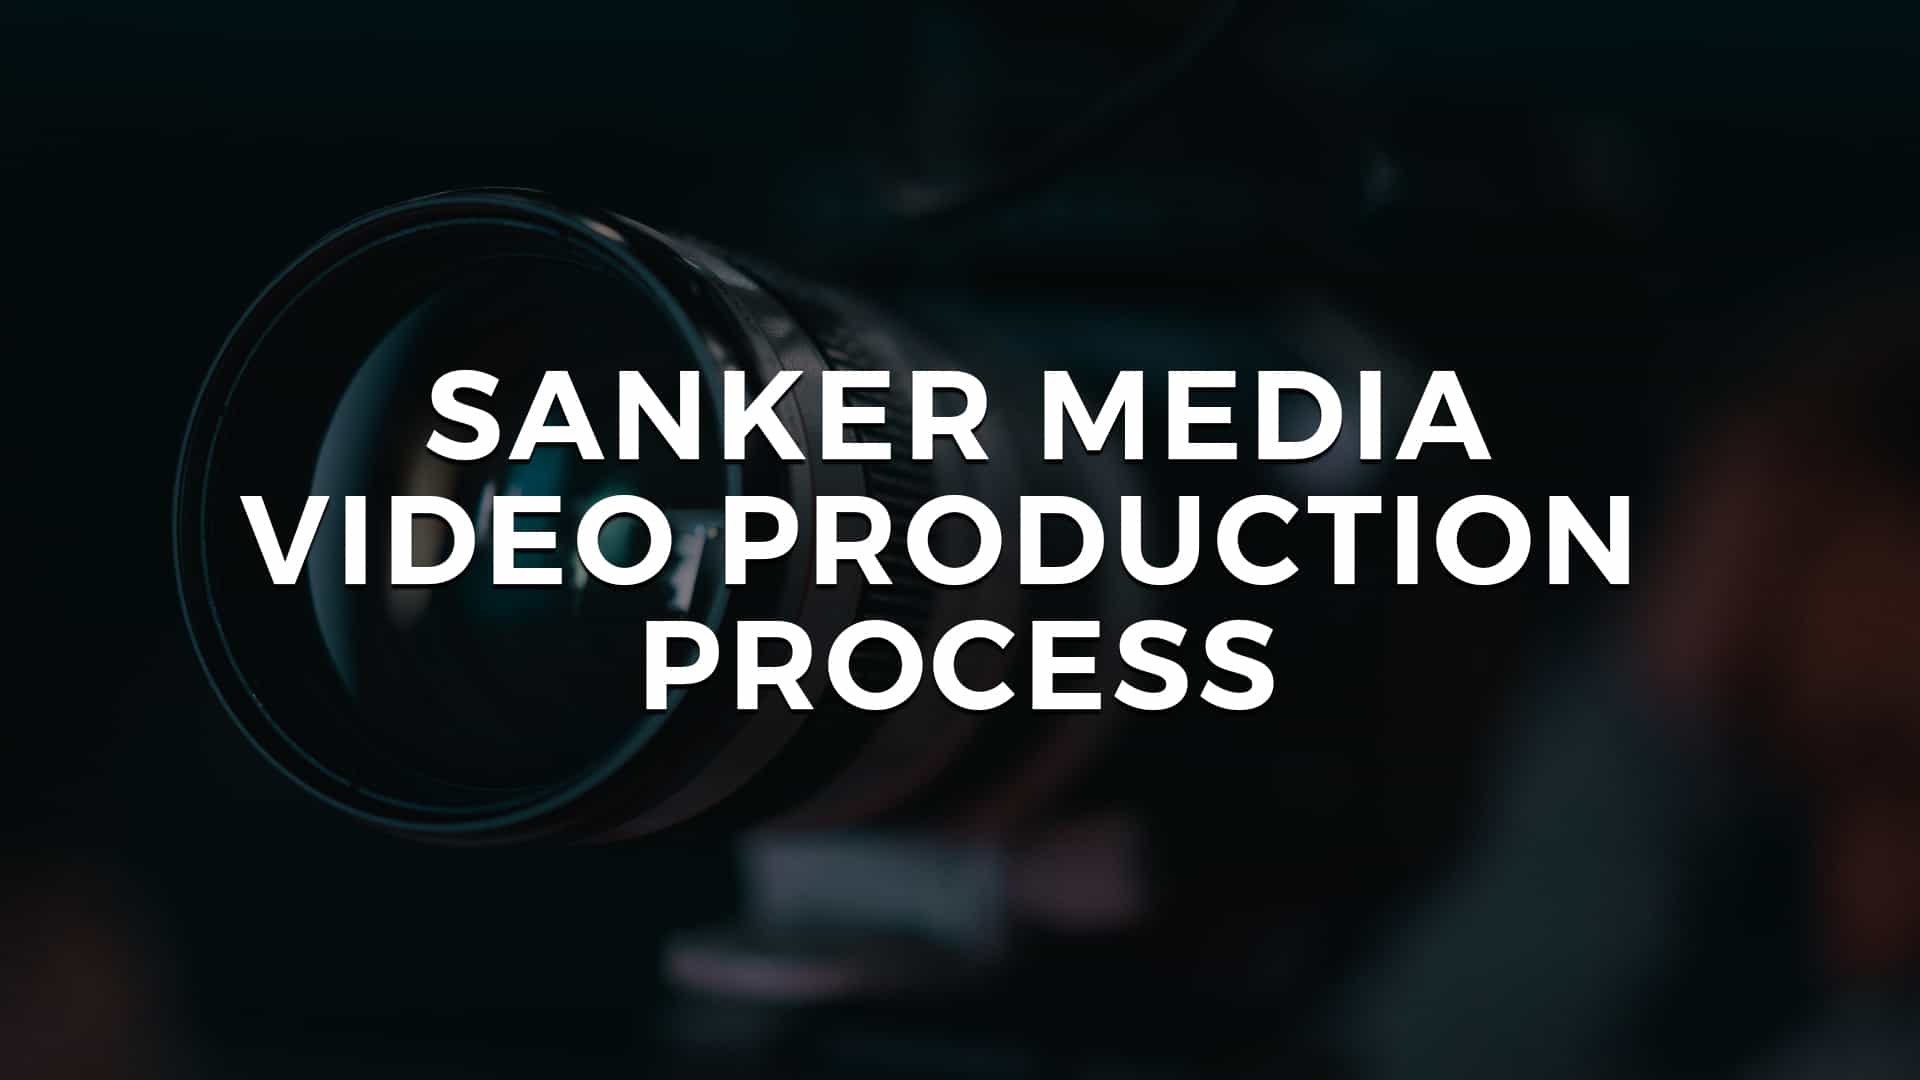 You are currently viewing SANKER MEDIA VIDEO PRODUCTION PROCESS